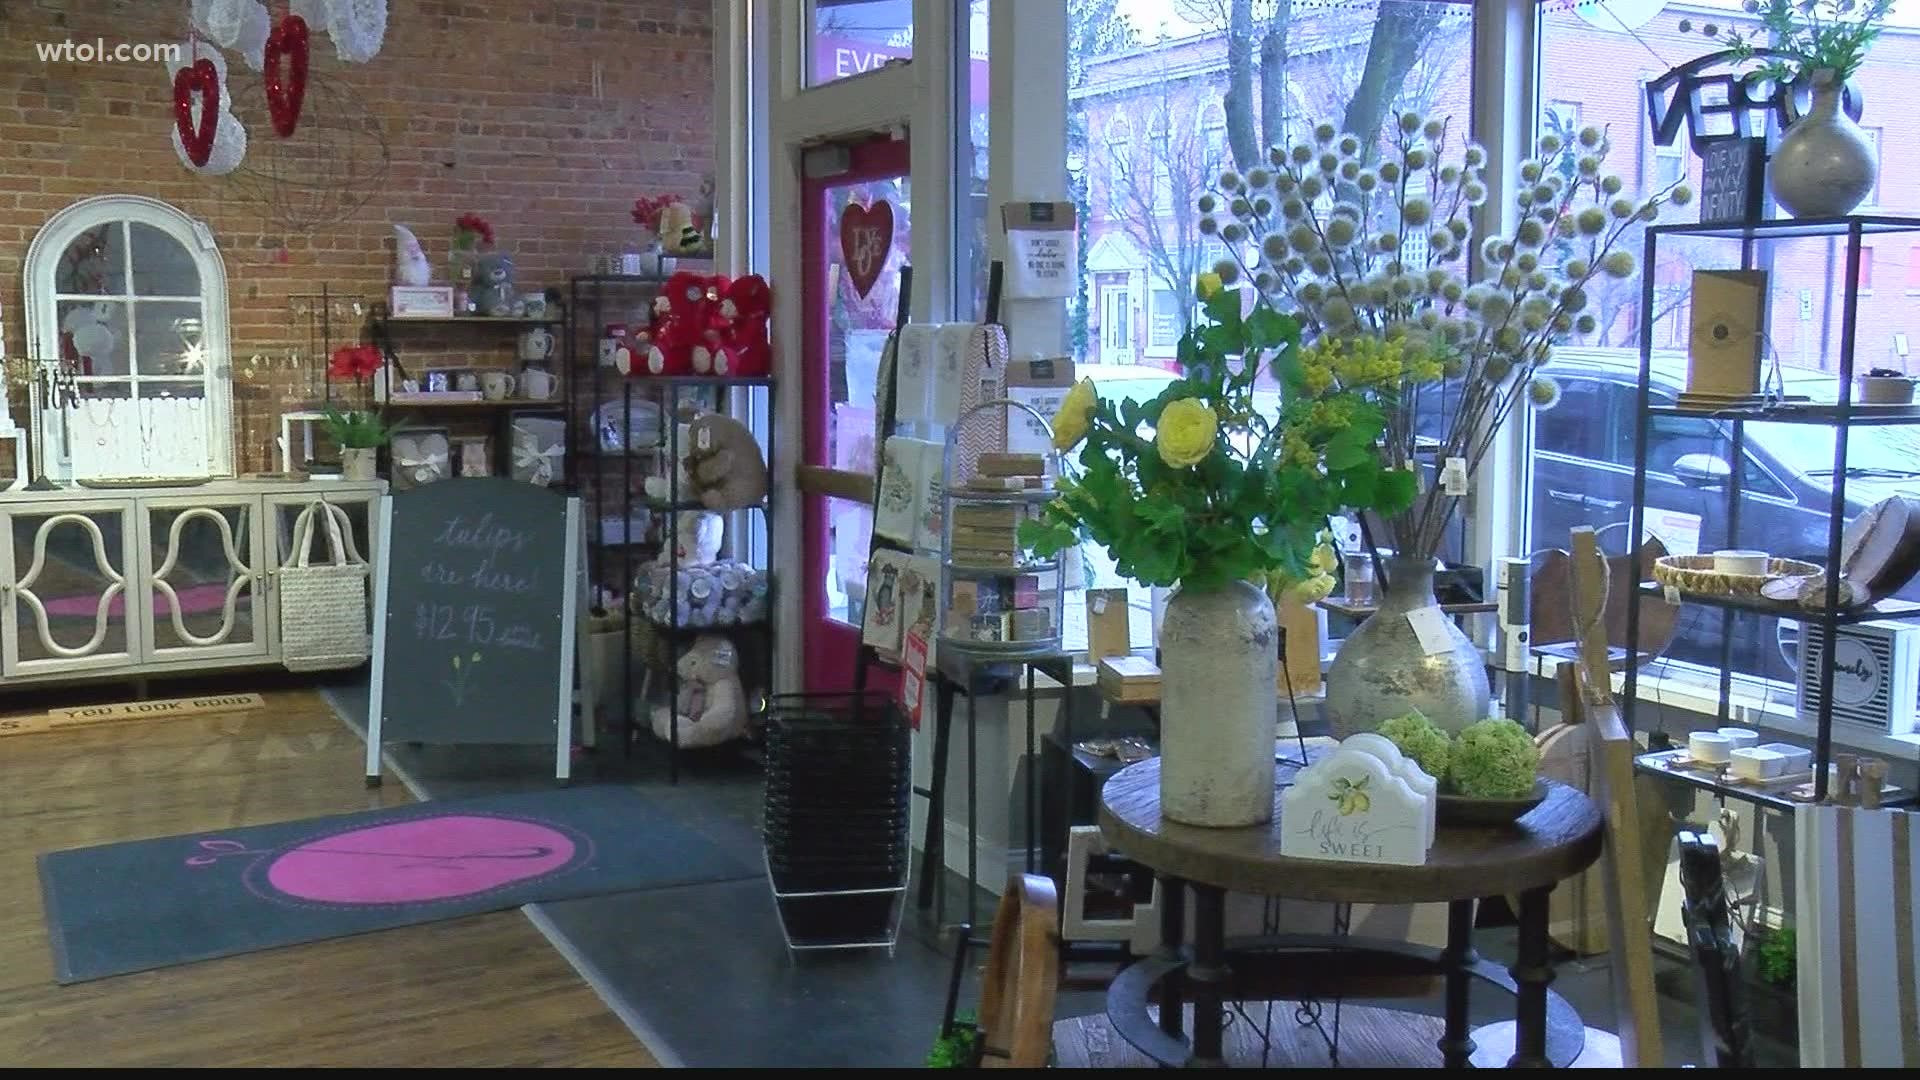 Hundreds of local educators will soon receive a bouquet of flowers purchased by people in the community